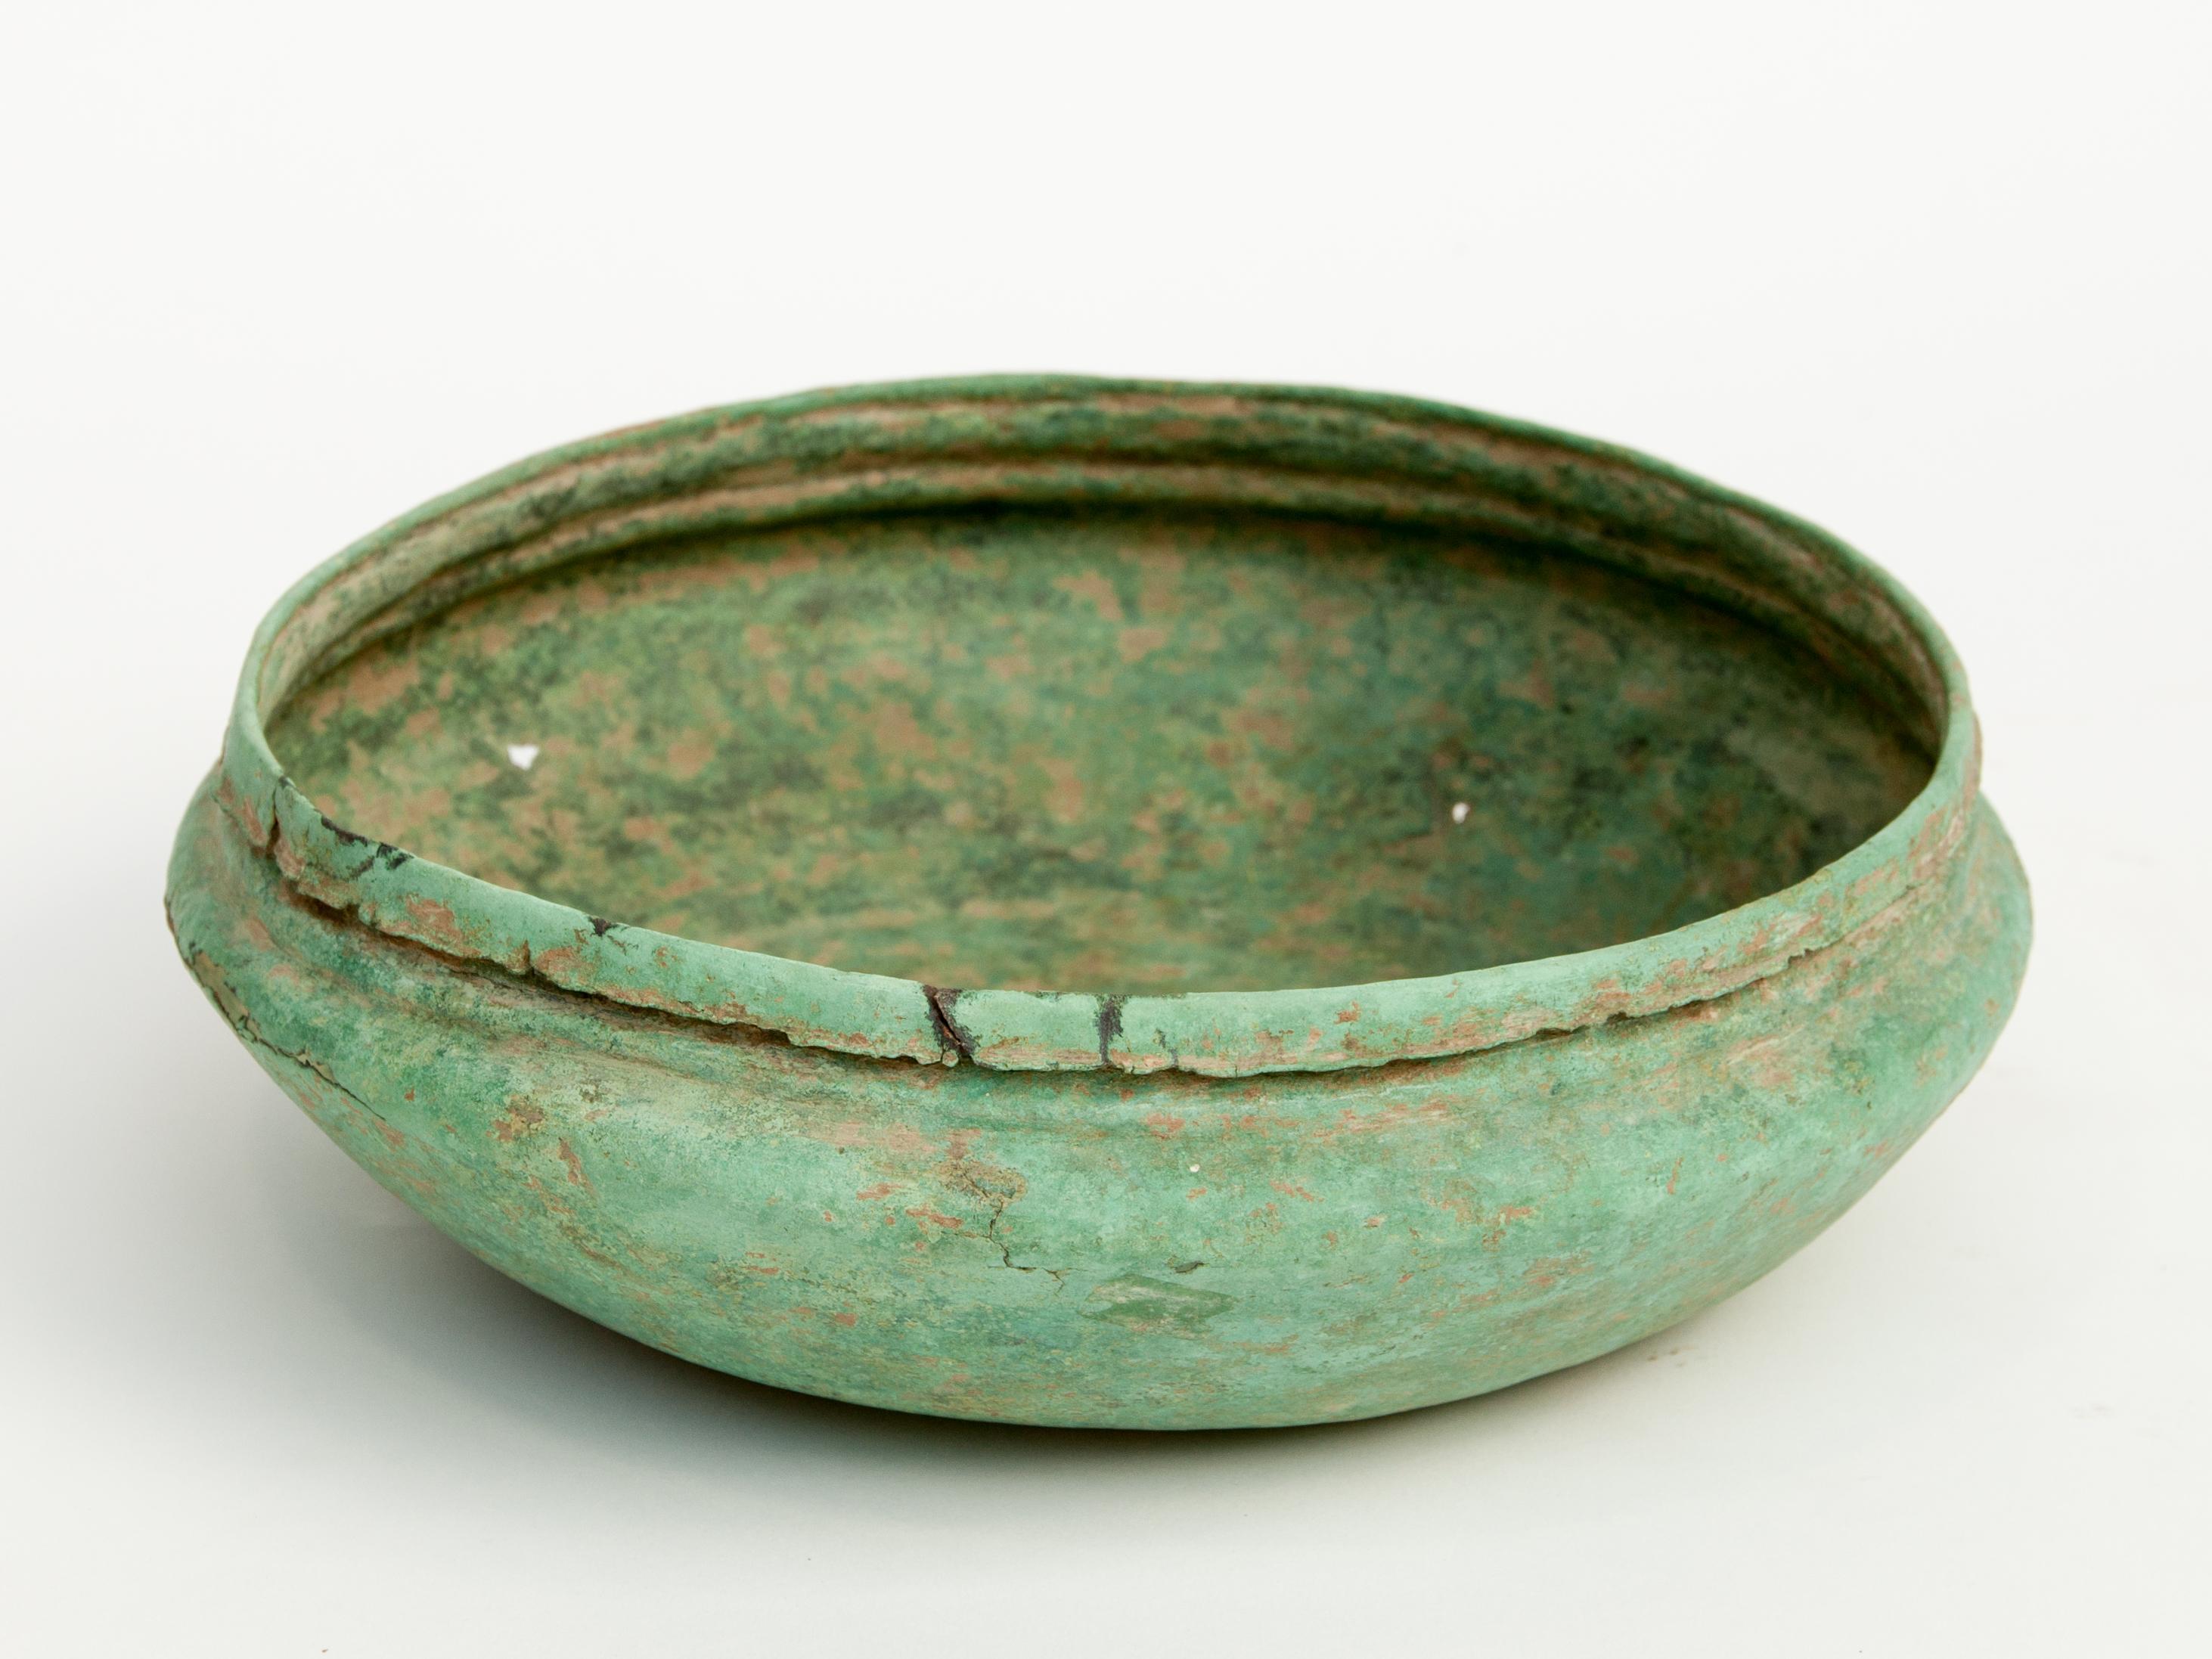 Antique copper or bronze offering bowl from Eastern Thailand (Tak Province), 19th century or earlier.
Verdigris patina. Most probably functioned as a monk's ceremonial or offering bowl.
Condition: The bowl is in distressed condition with